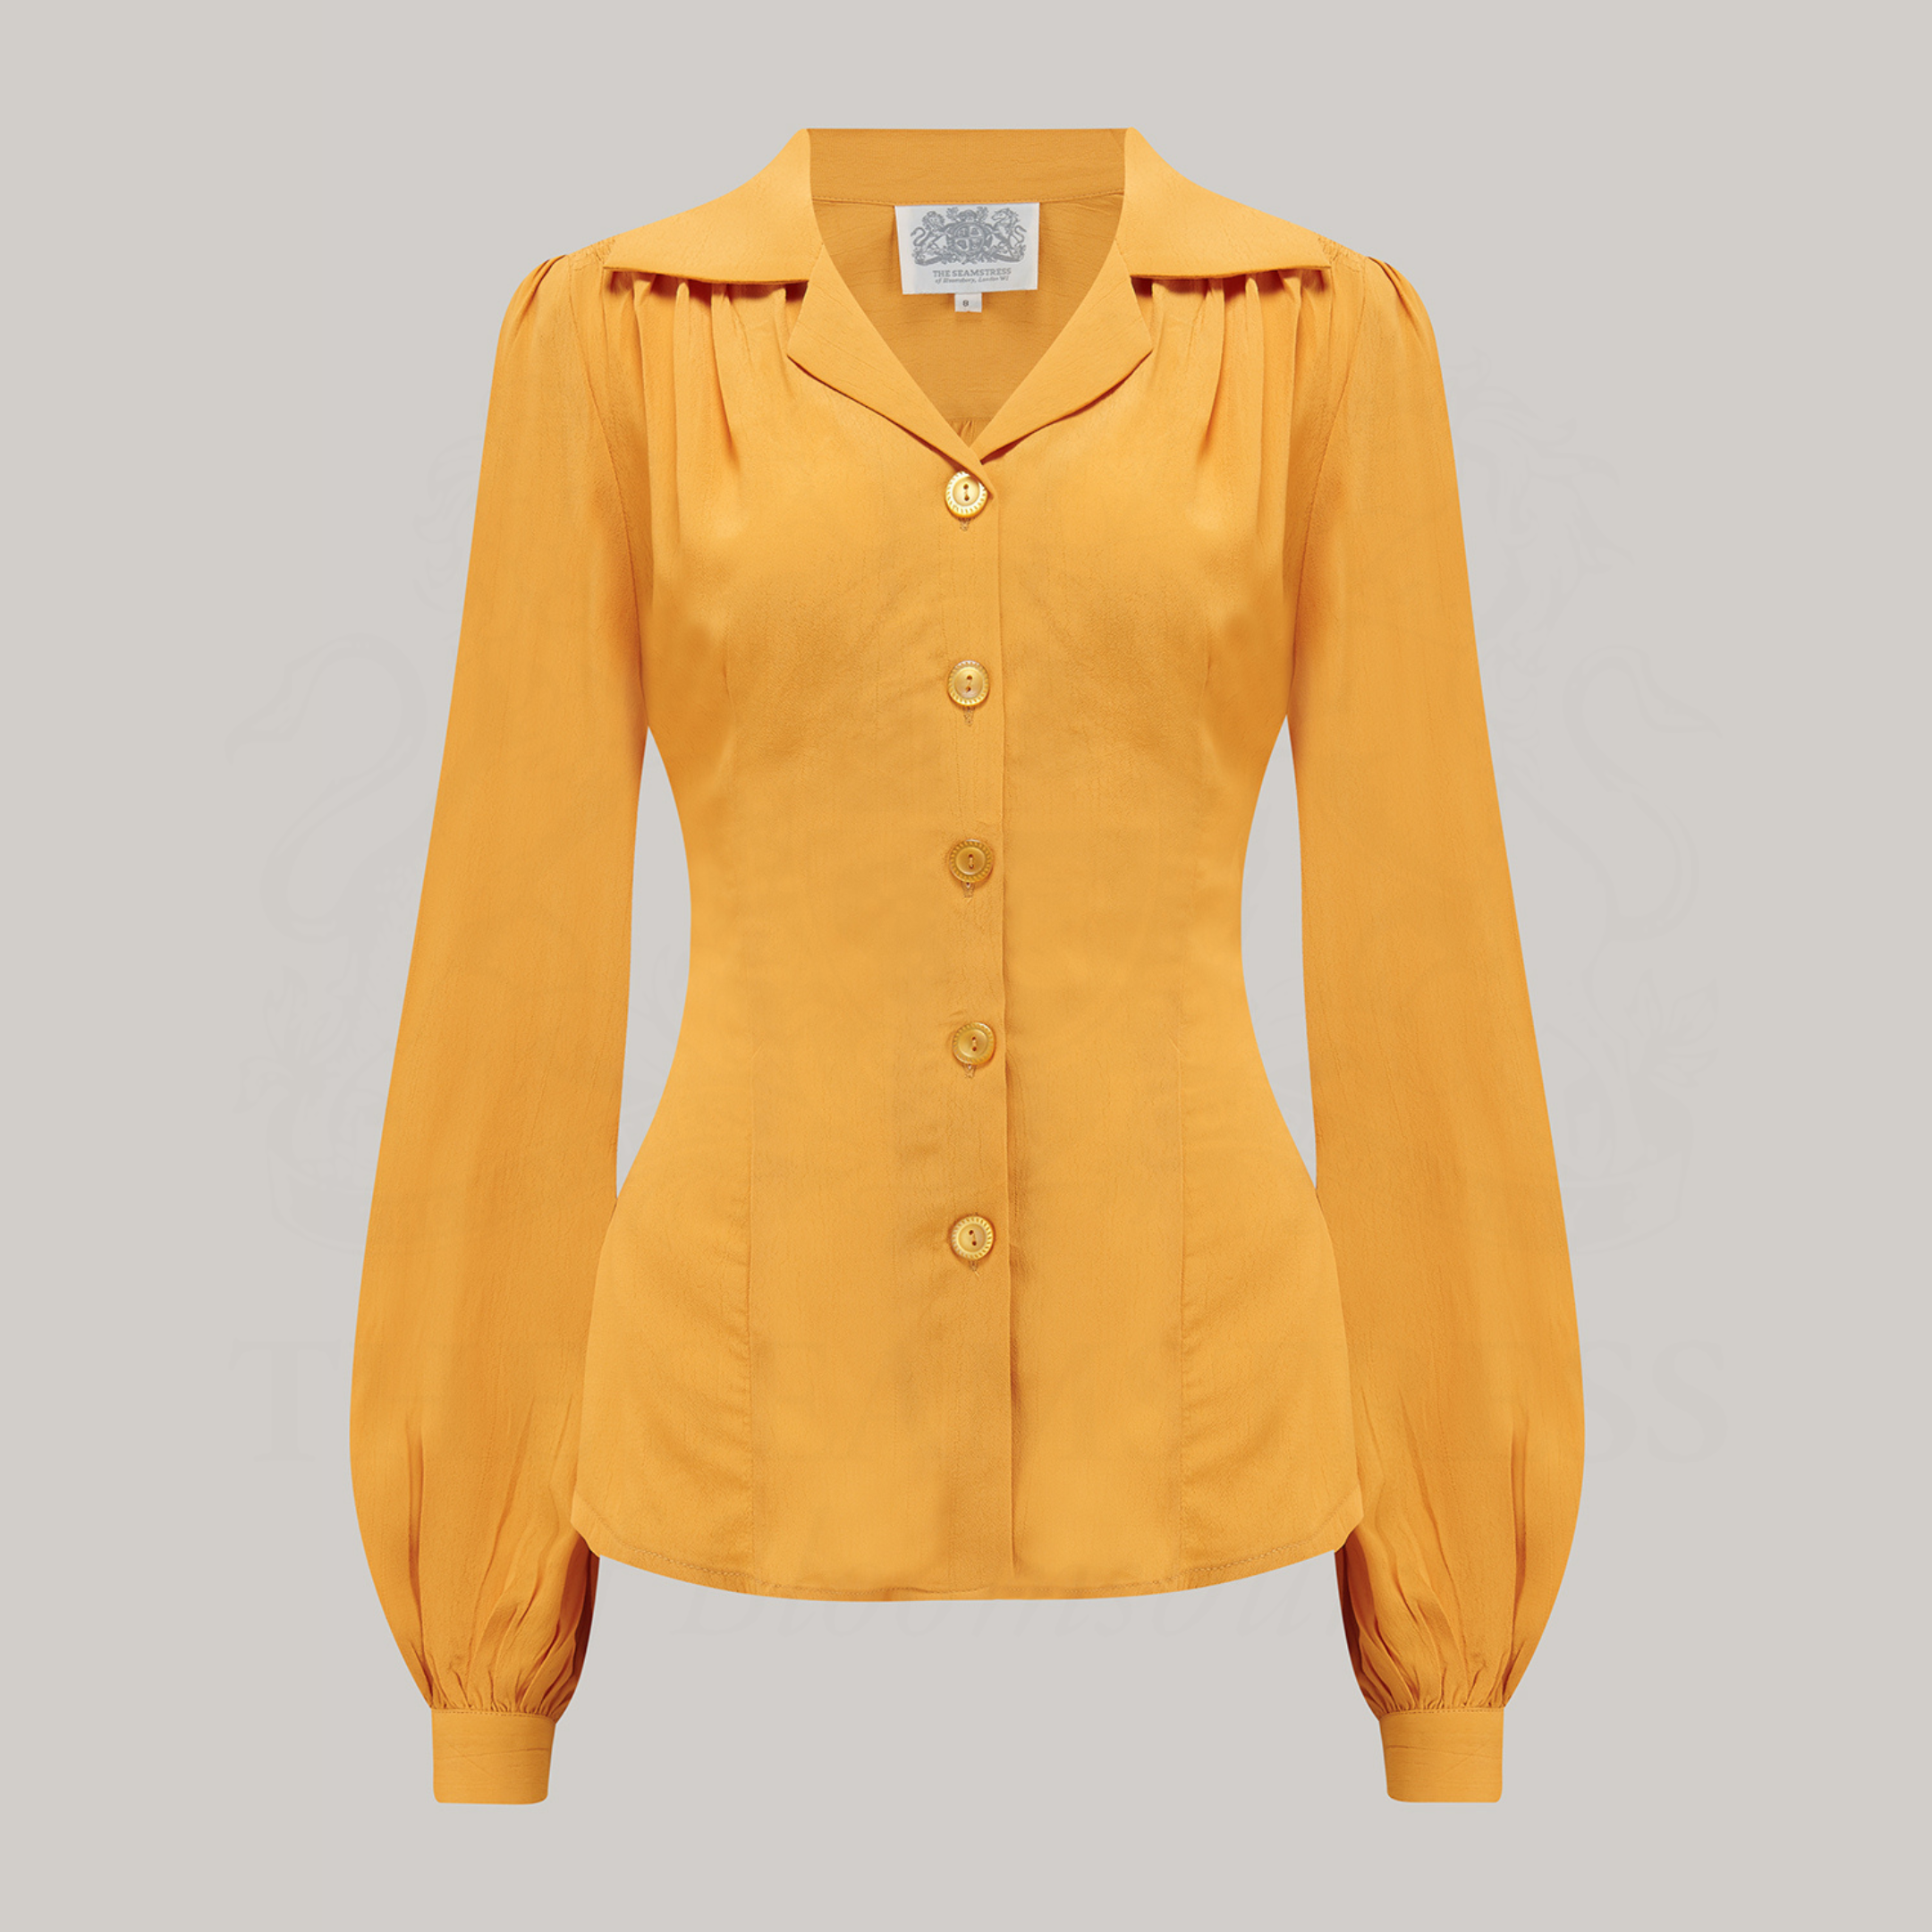 Poppy Blouse in Mustard | Classic 1940s Style Women's Blouse - The